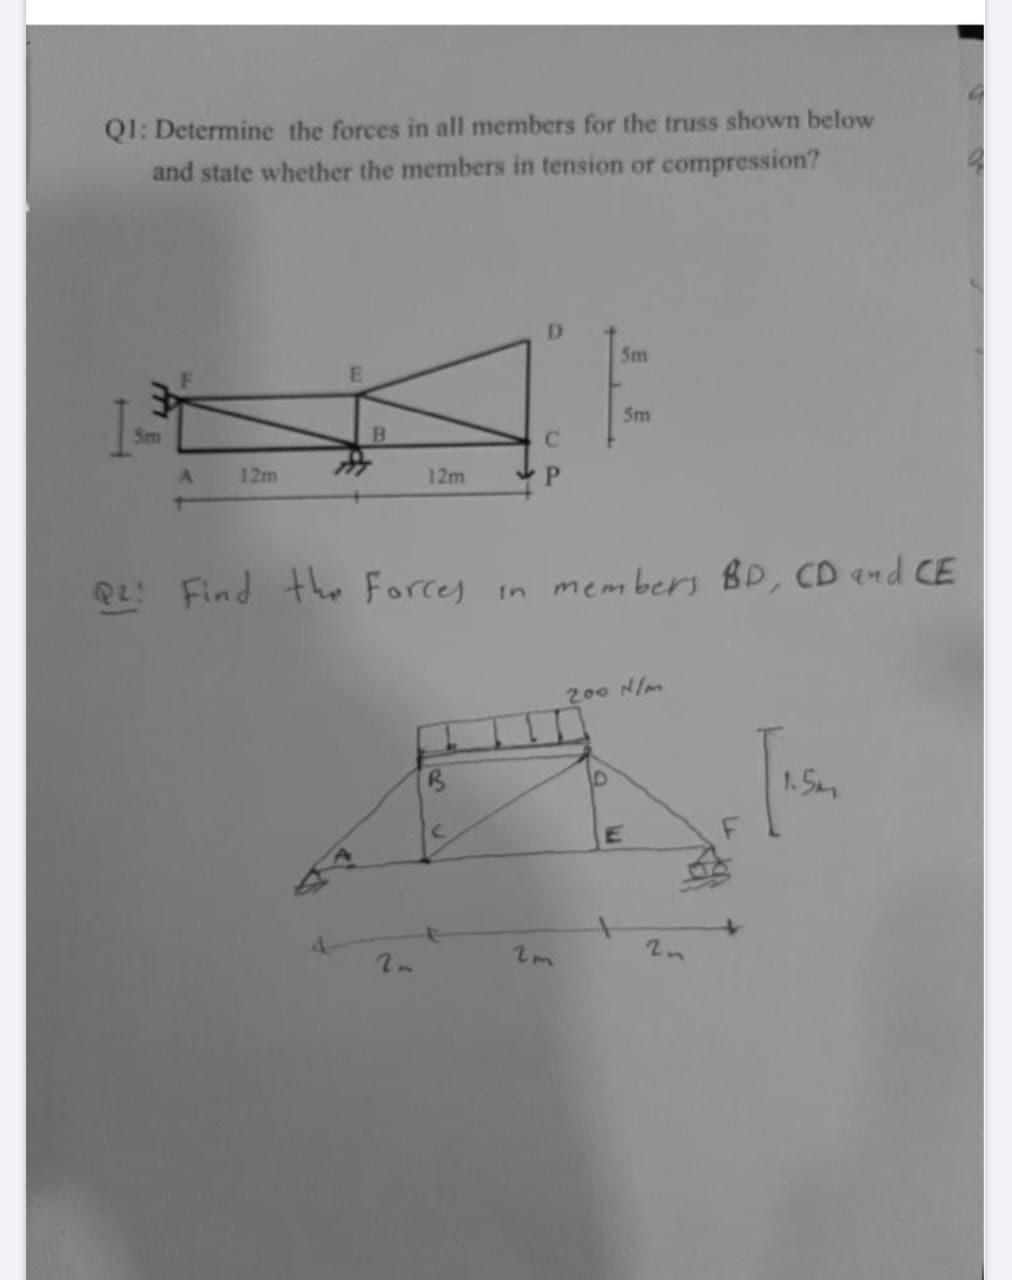 QI: Determine the forces in all members for the truss shown below
and state whether the members in tension or compression?
D
5m
Sm
Sm
A.
12m
12m
P.
PL Find the Forces in members BD, CD end CE
200 N/m
1. 5m
E
2n
2m
